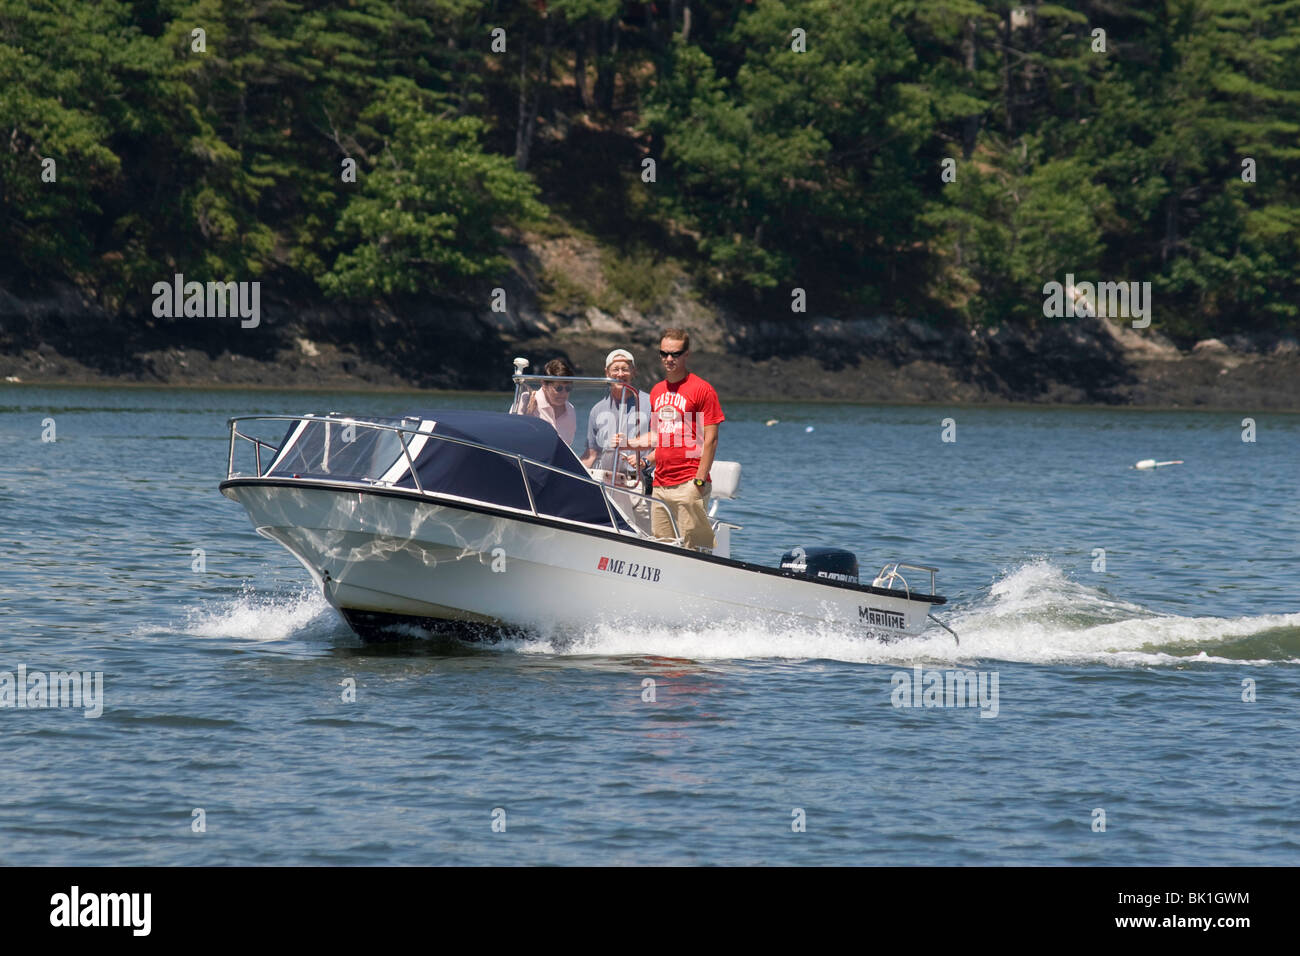 Summer motorboating on the Sheepscot River in Maine Stock Photo